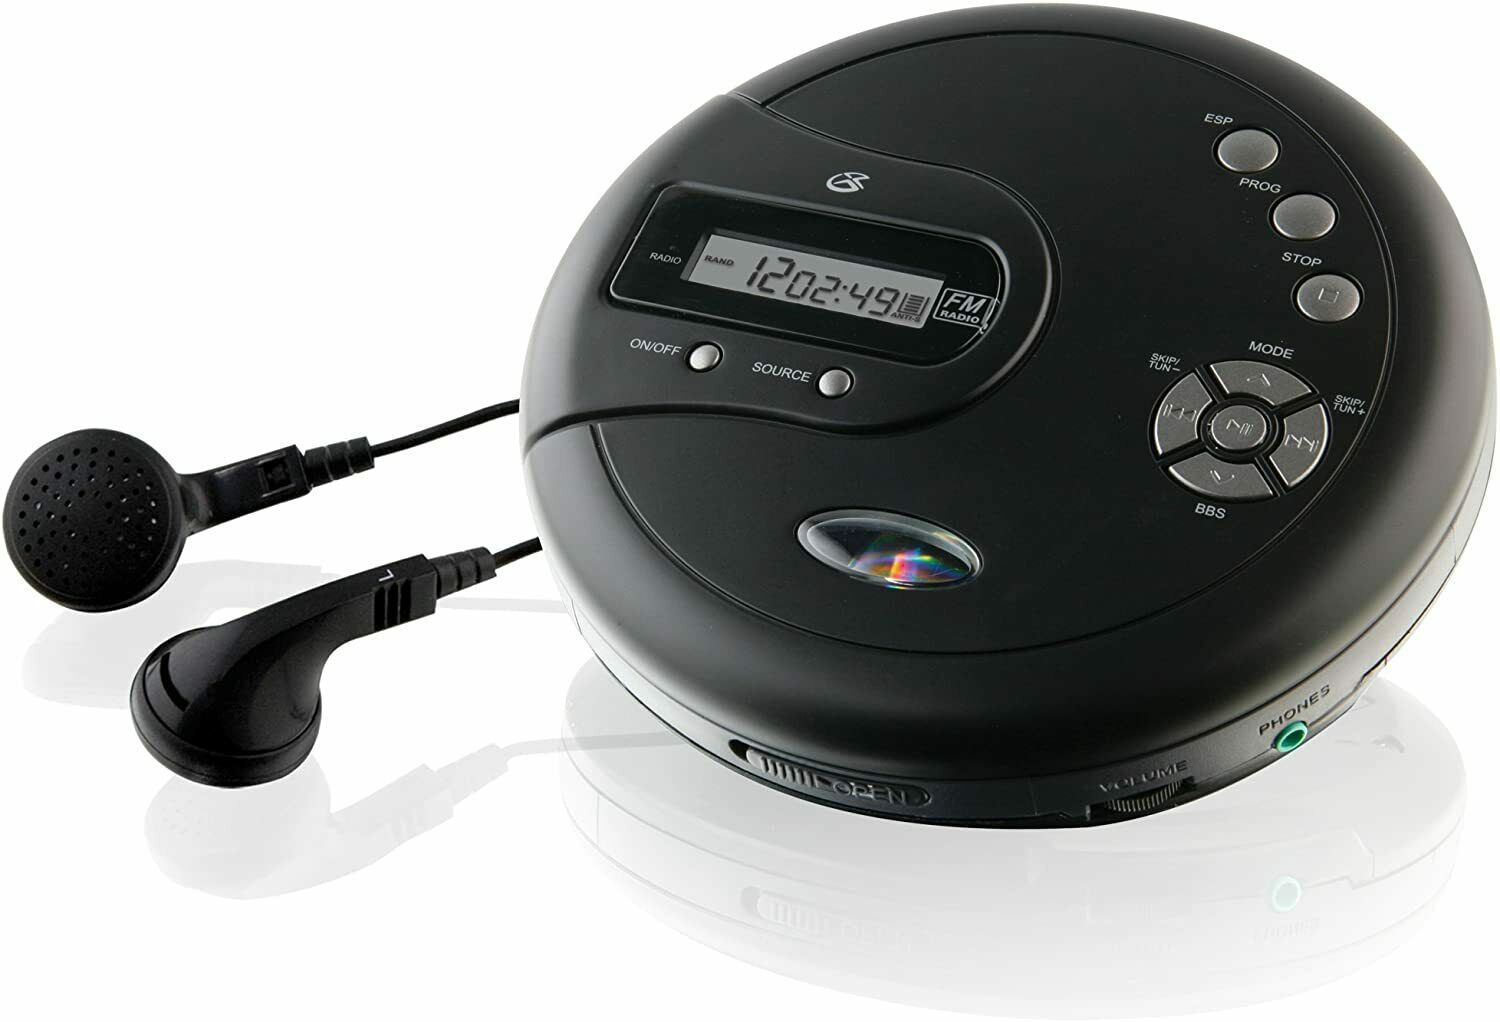 Gpx Pc332b Portable Cd Player With Anti-skip Protection, Fm Radio With Earbuds